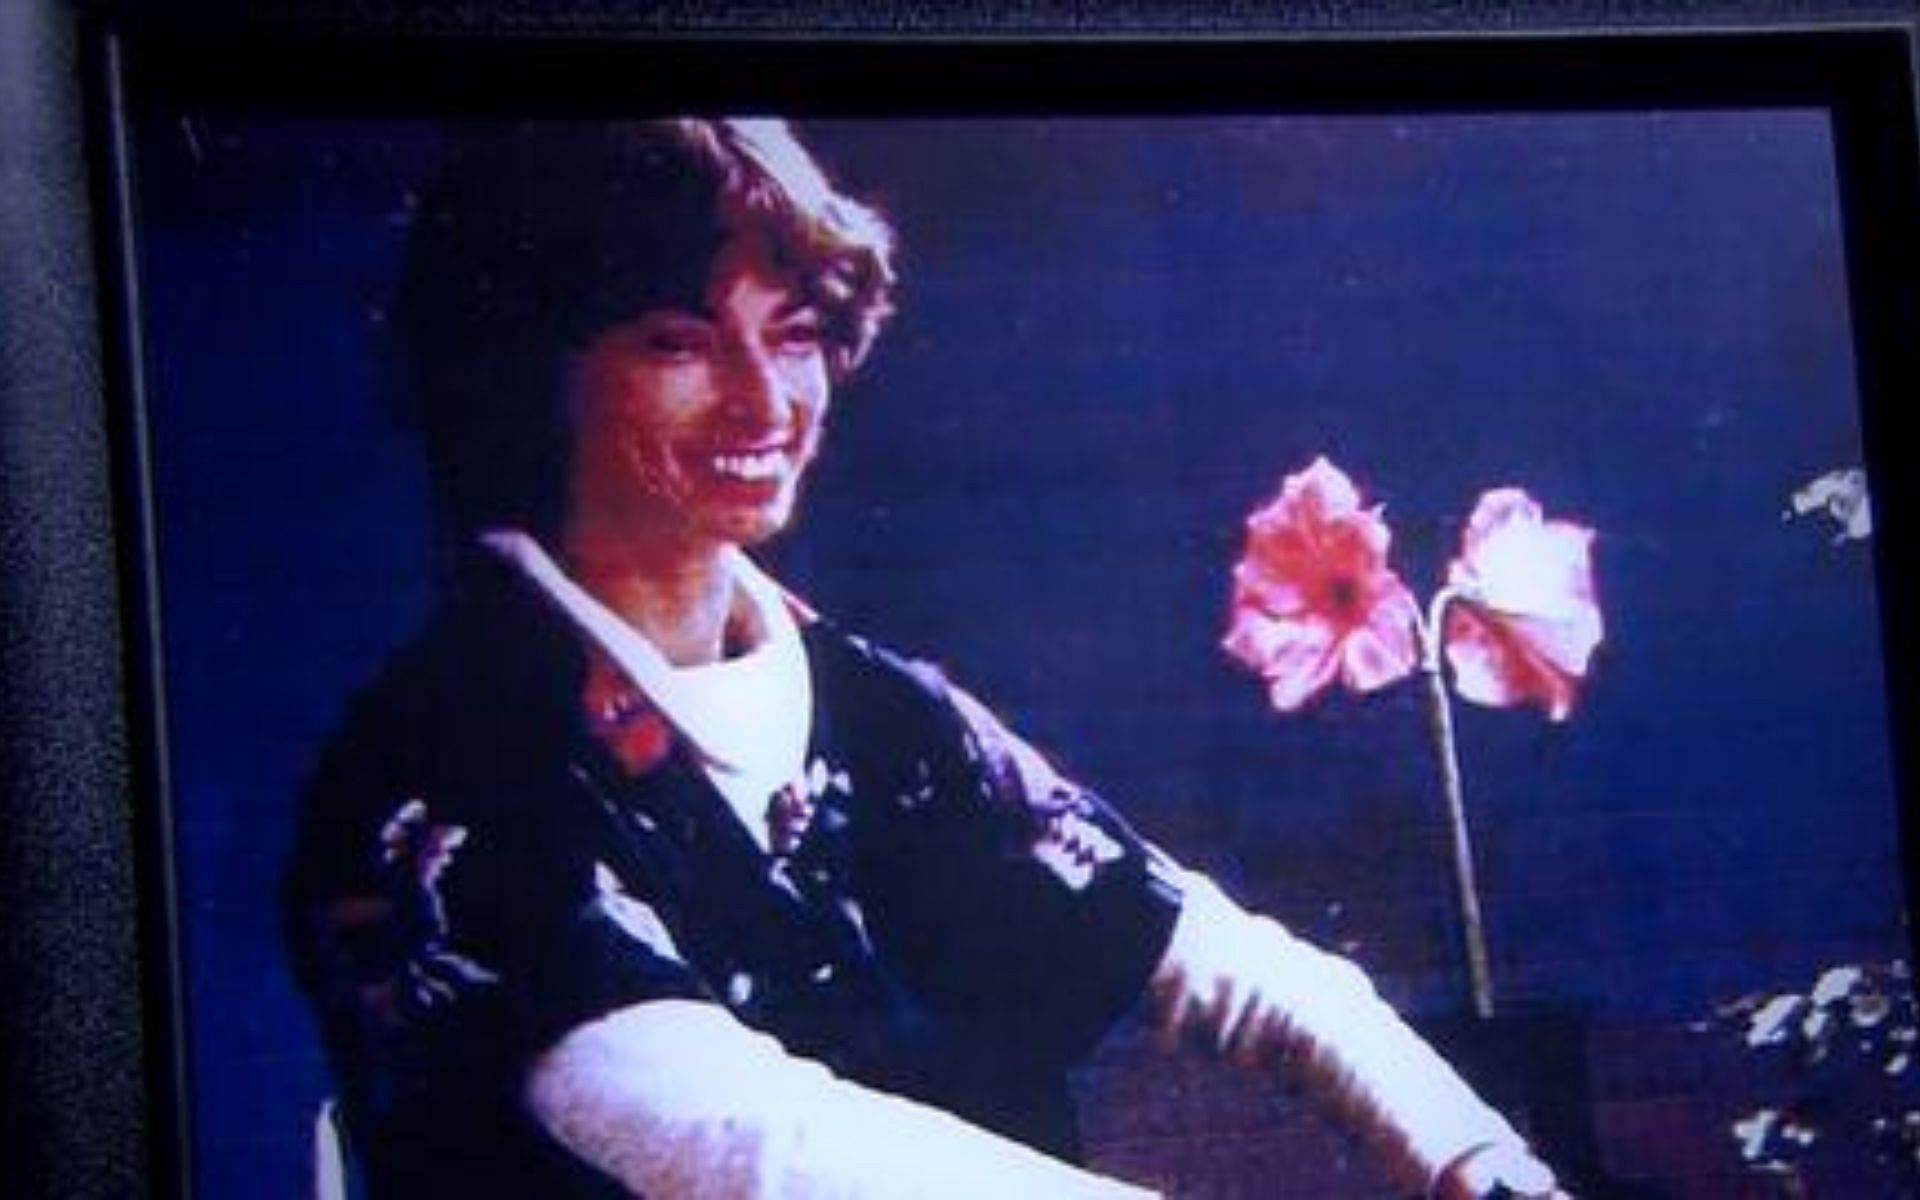 A portrait of Katherine Mordick clicked before she was brutally murdered in their Ridgecrest home (Image via NBC)